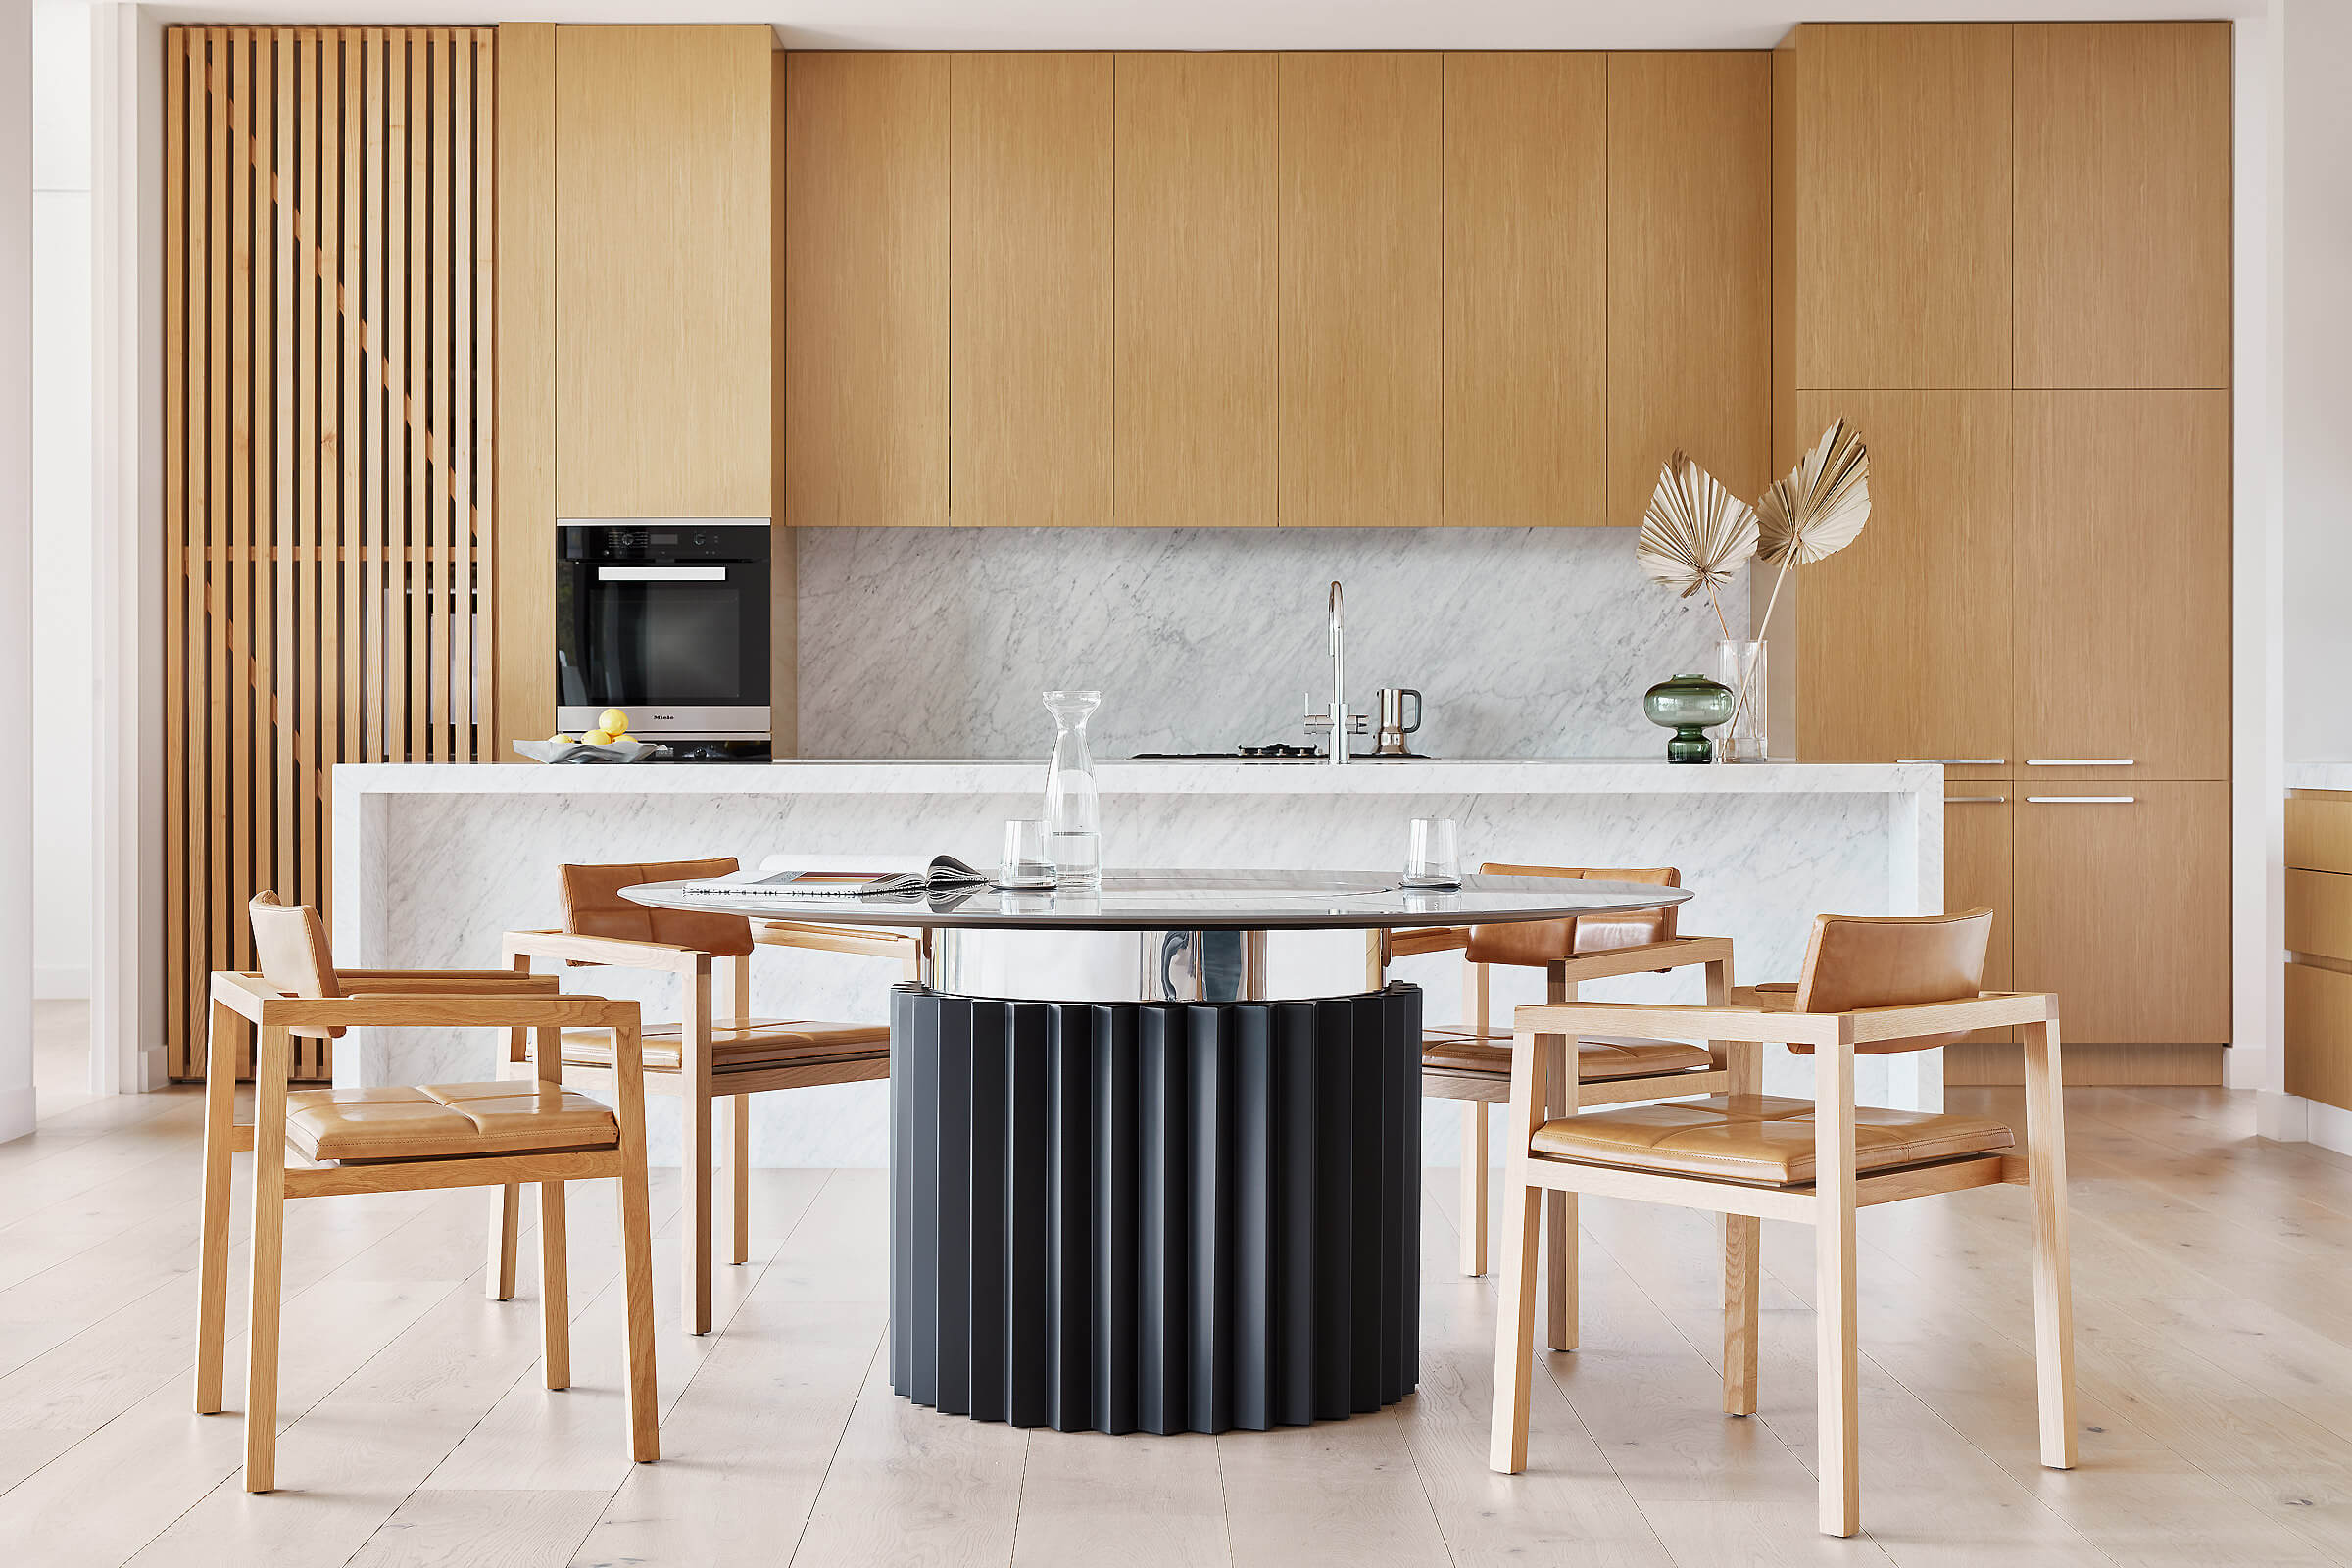 Four solid oak wood chairs gathered around FrancoCrea's designer dining table crafted with corian table top and mirror polished stainless steel base